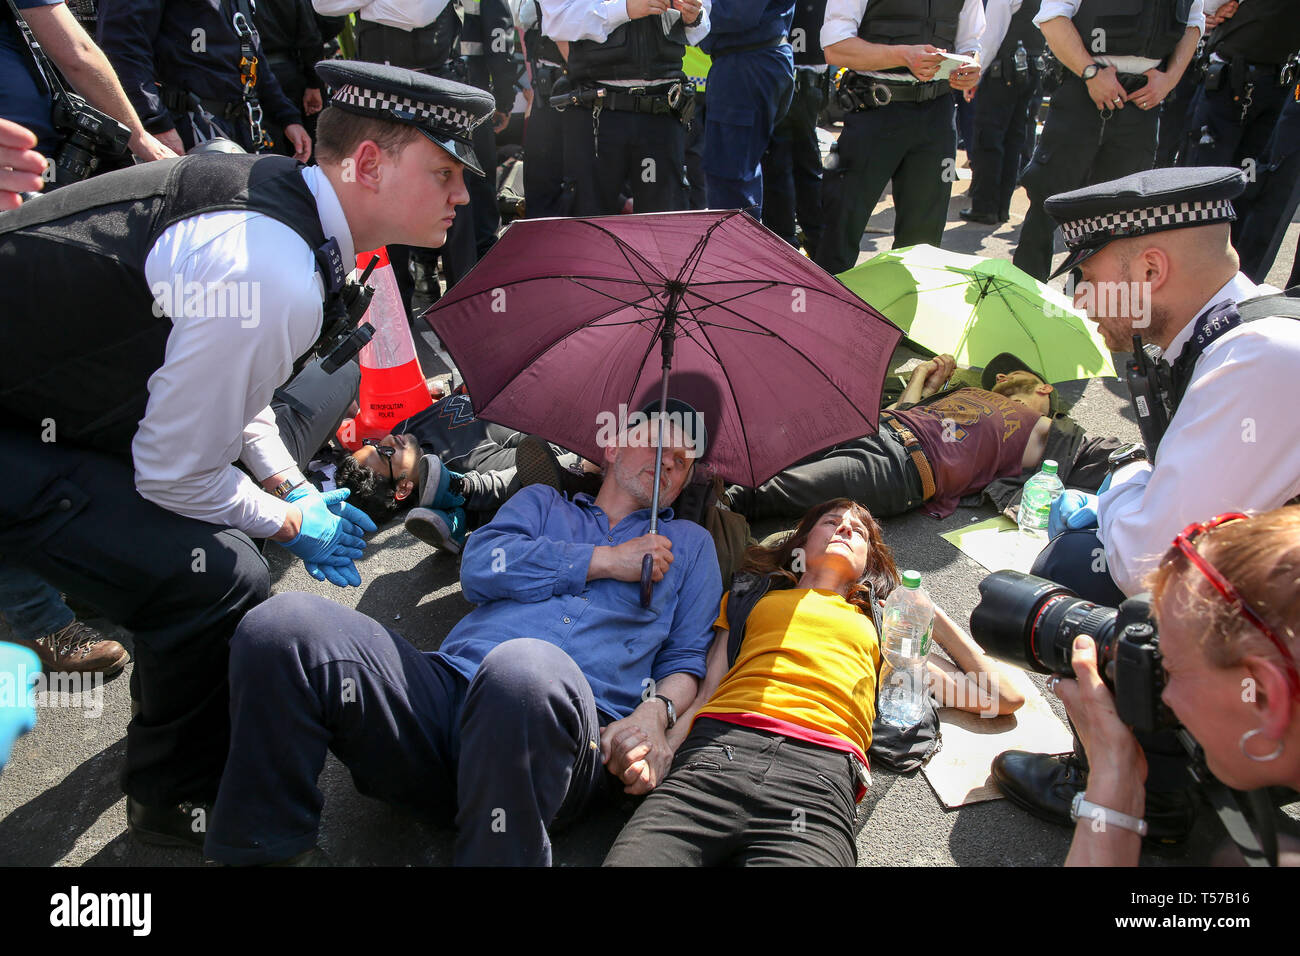 Environmental activists are seen lying on the ground at the Oxford Circus during the fifth day of the climate change protest by the Extinction Rebellion movement group. A large number of police presence around the pink yacht as they un-bond the activists who glued themselves and the police prepares to remove them from the site. According to the Met Police, over 1000 activists have been arrested since the demonstration started on 11 April 2019. Stock Photo